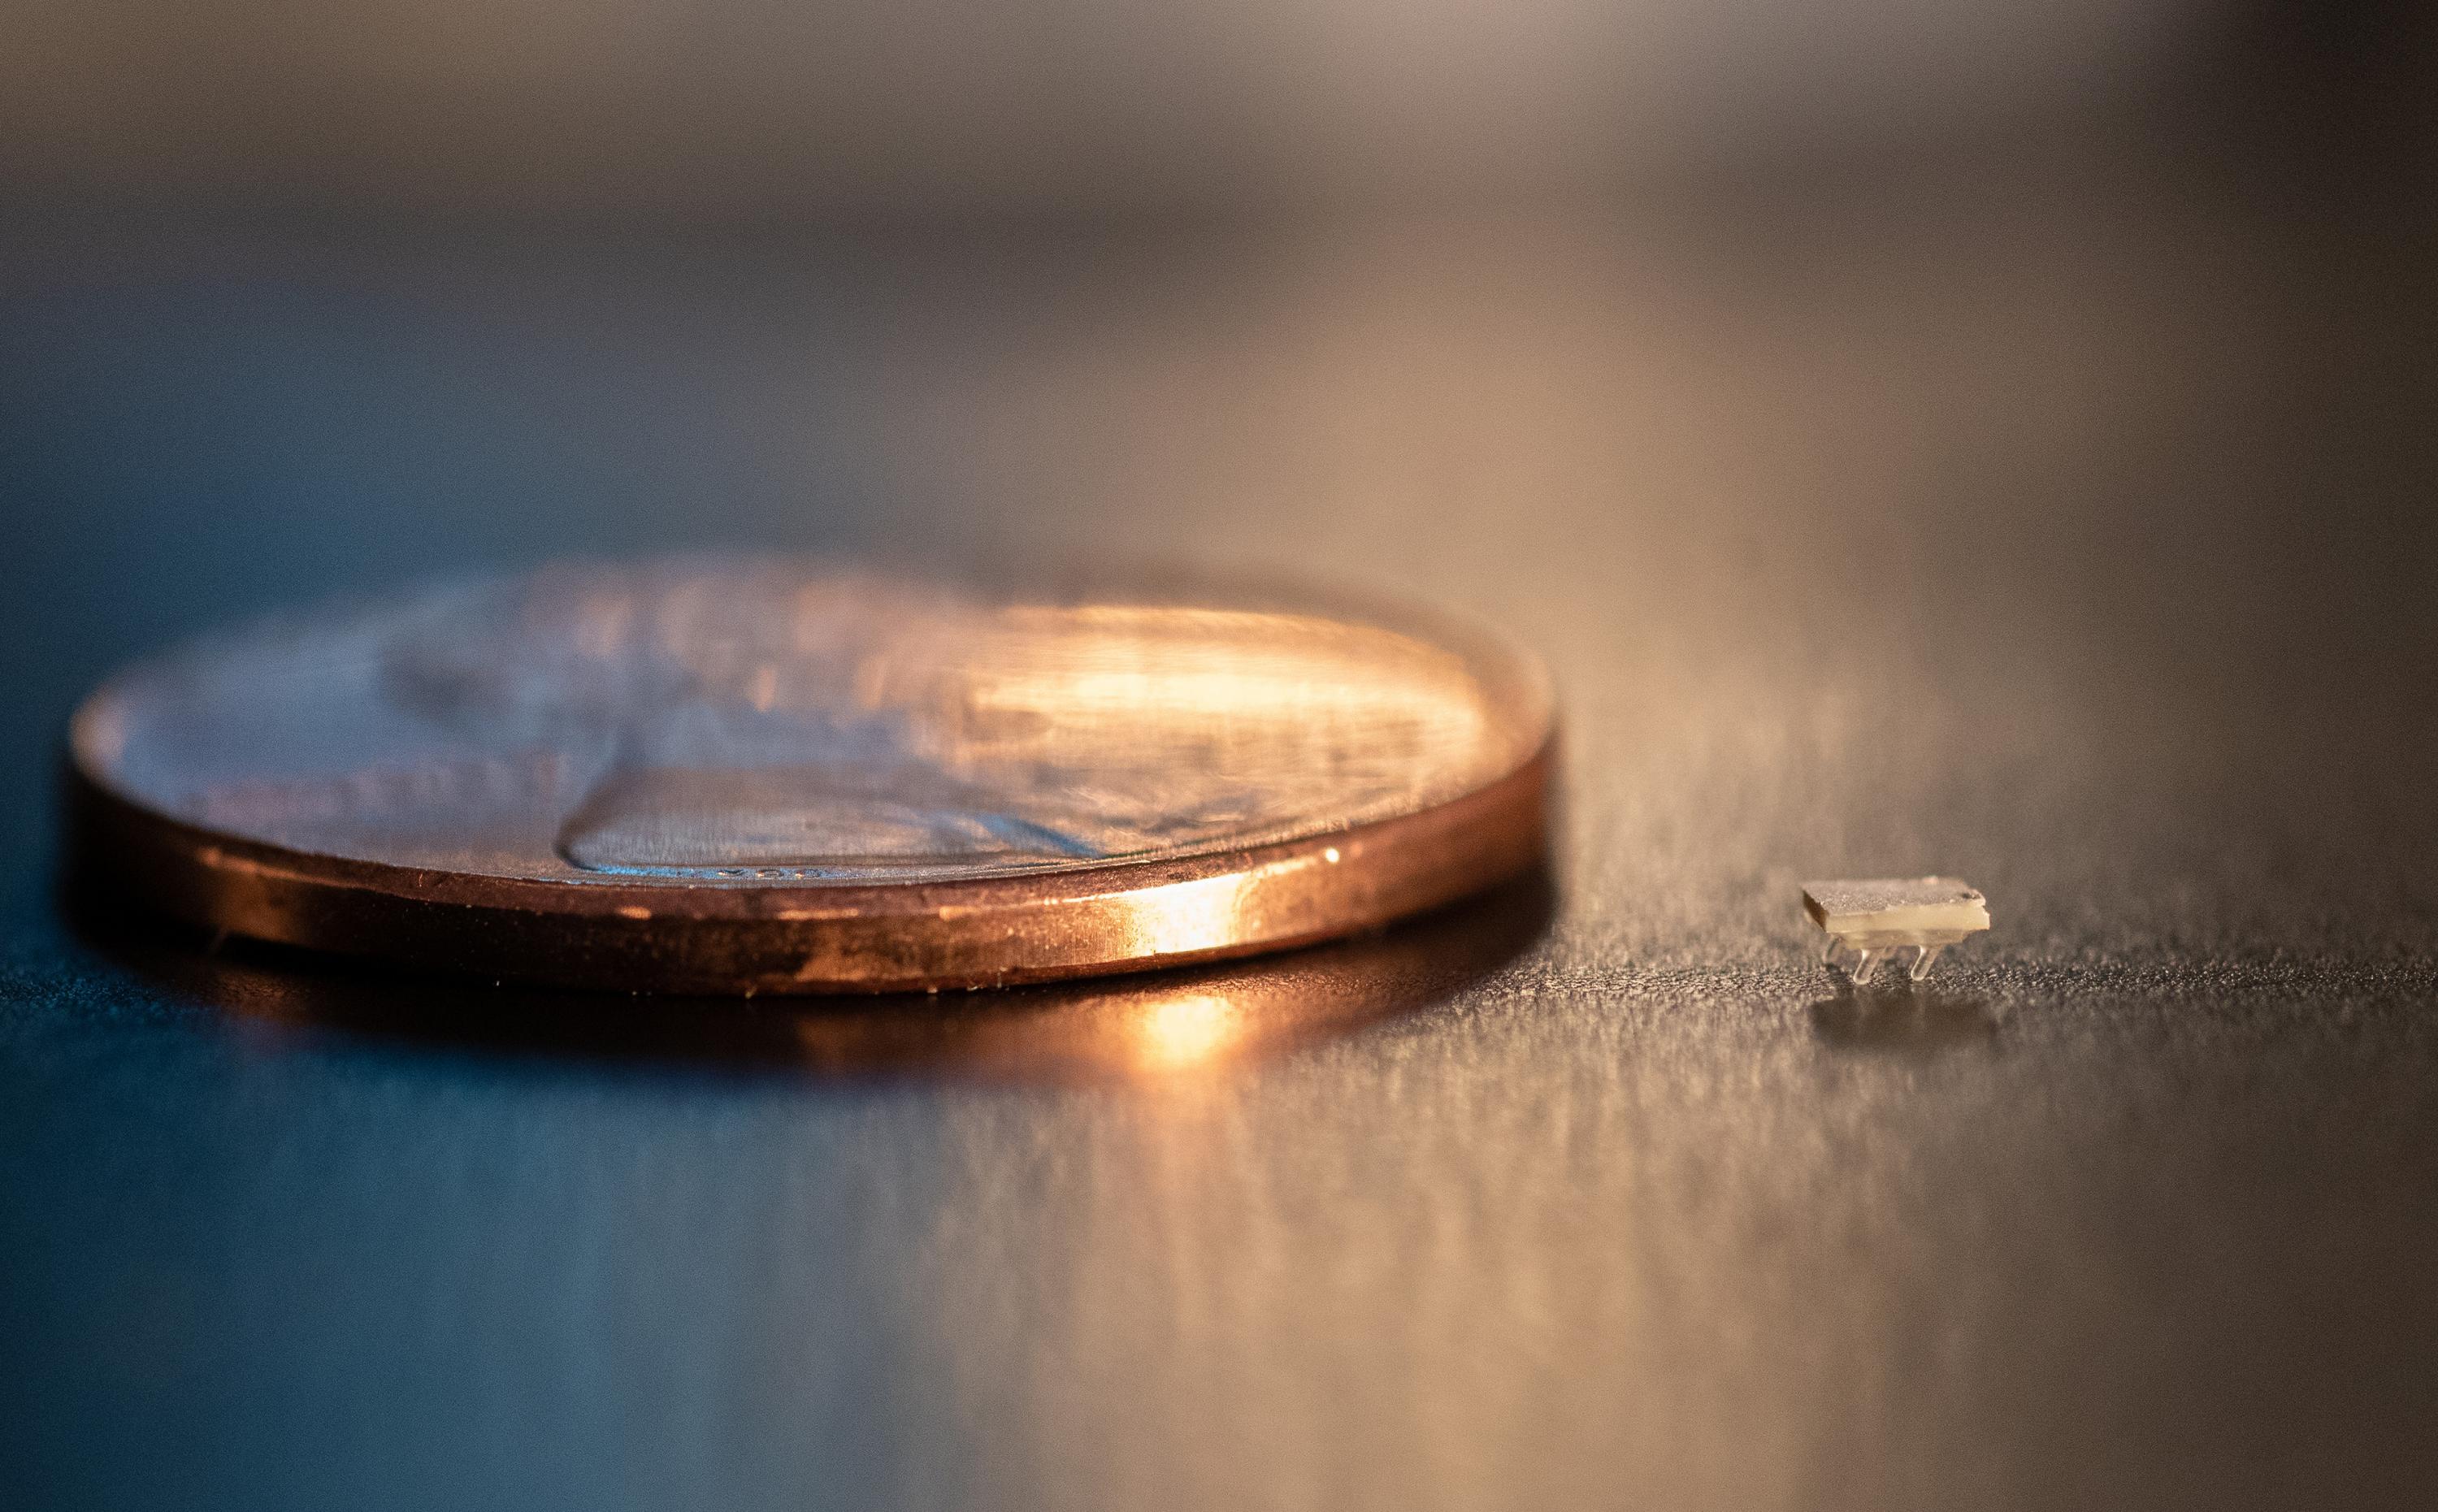 A micro-bristle-bot is shown next to a U.S. penny for size comparison. (Photo: Allison Carter)